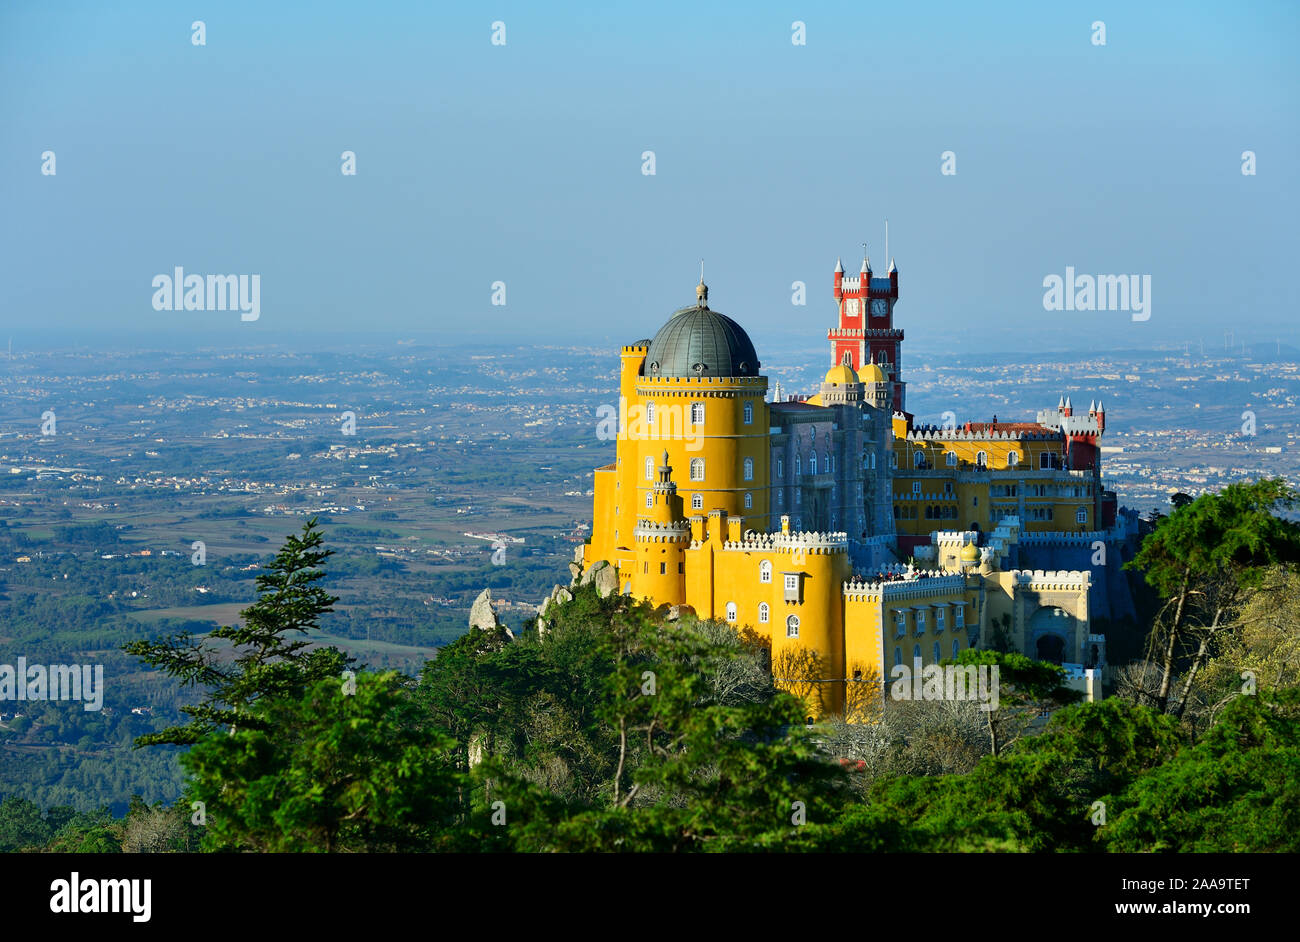 Palácio da Pena, built in the 19th century on the hills above Sintra, in the middle of a UNESCO World Heritage Site. Sintra, Portugal Stock Photo